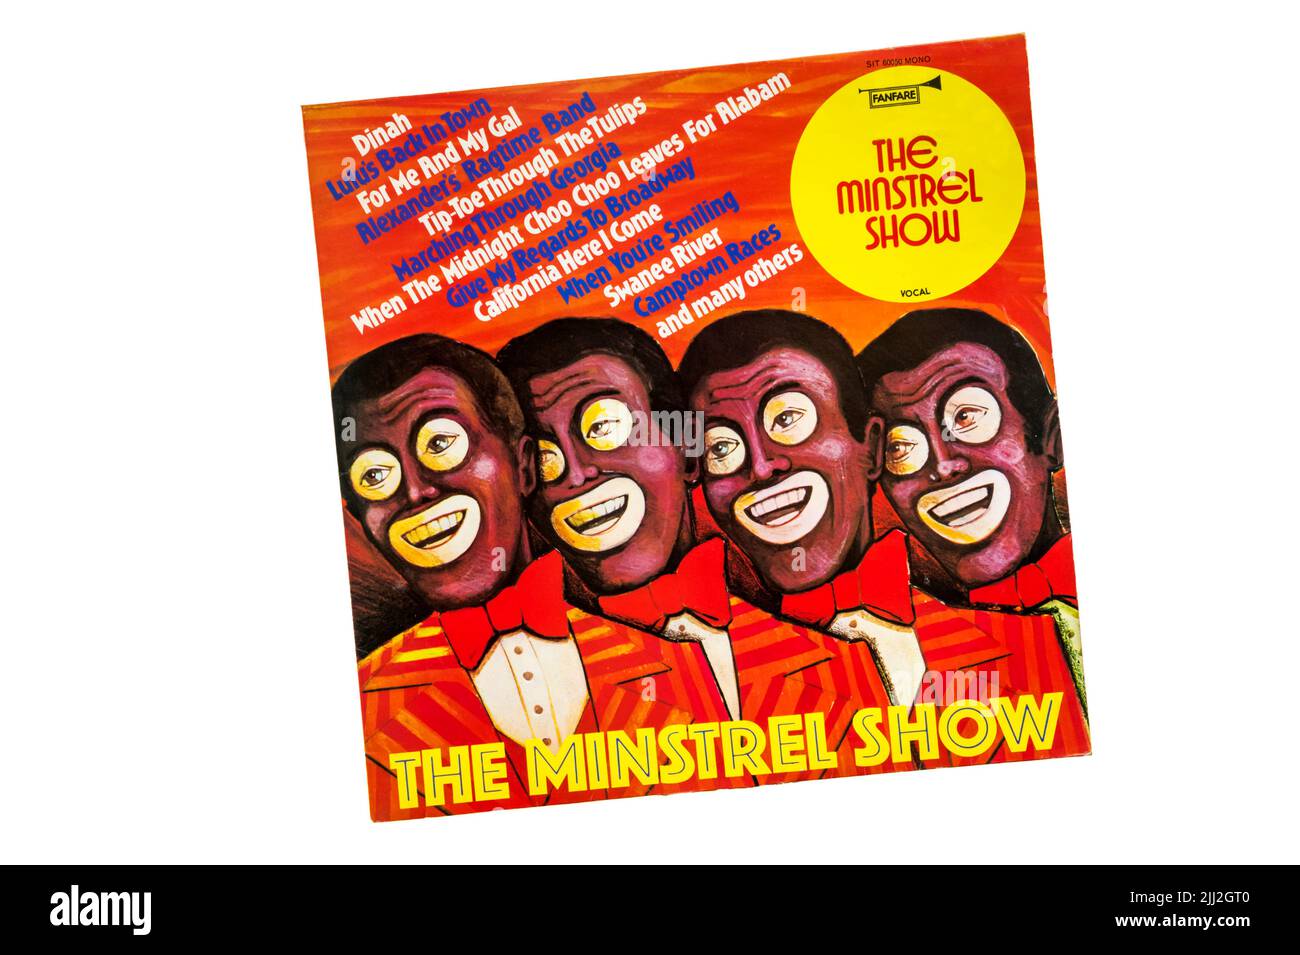 The Minstrel Show LP based on BBC TV series The Black & White Minstrel Show and released in 1967. Stock Photo